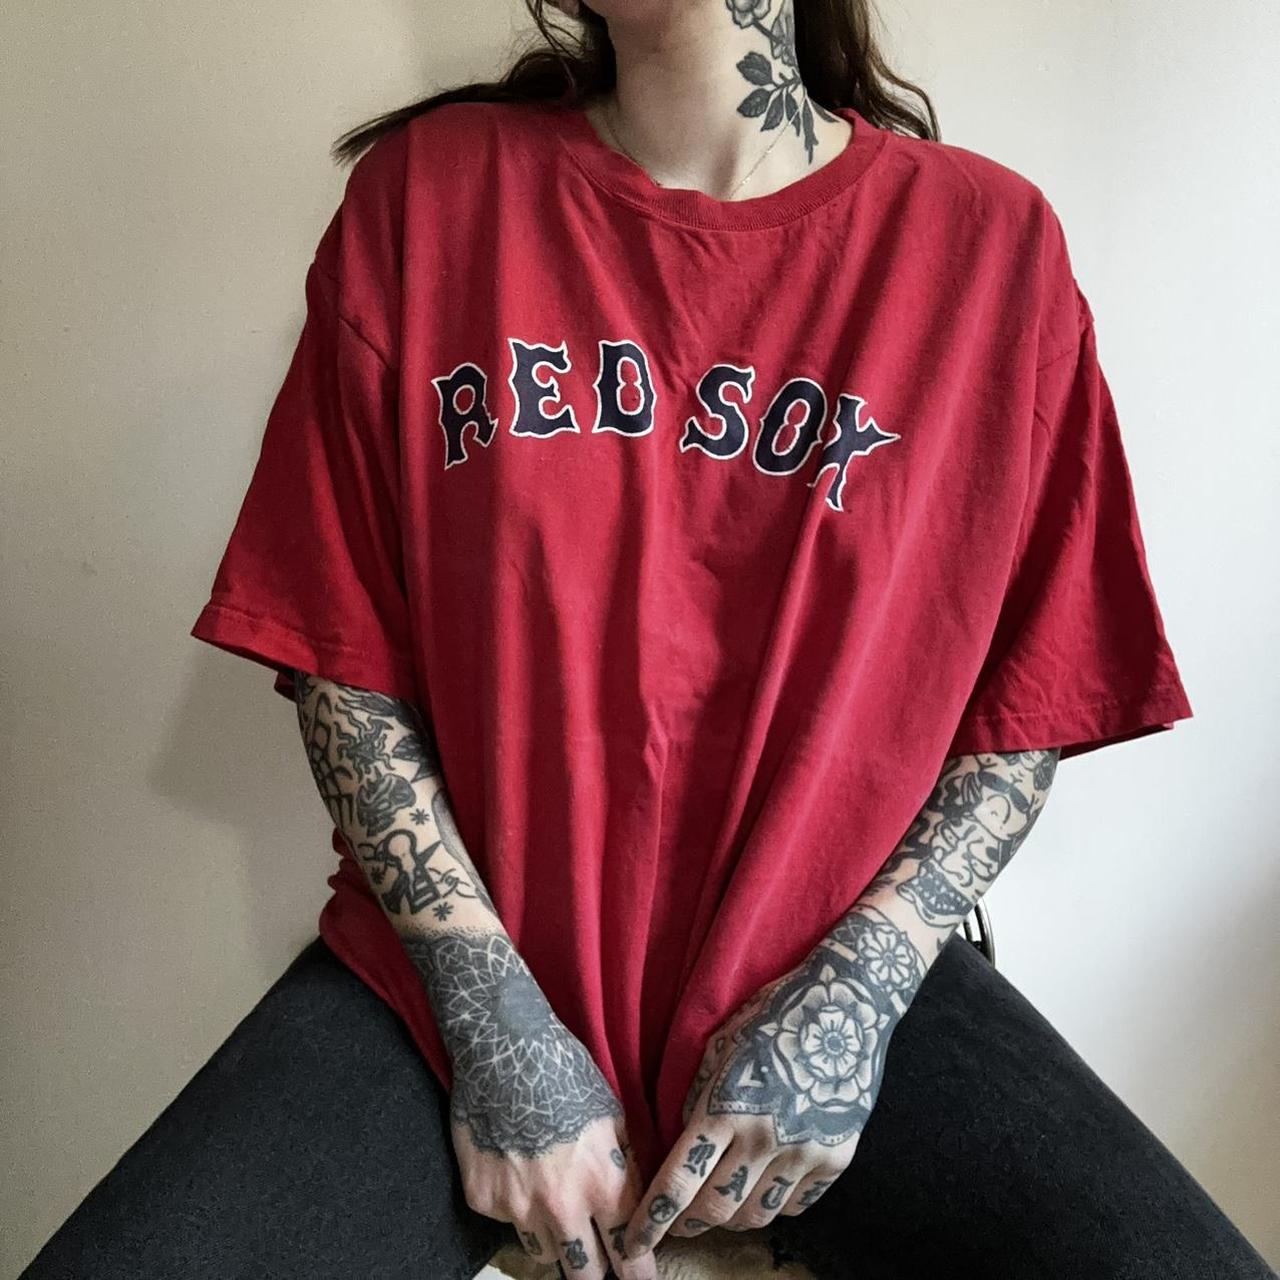 Vintage Red Sox t shirt 🖤🌸 ABOUT THE ITEM: HAS - Depop